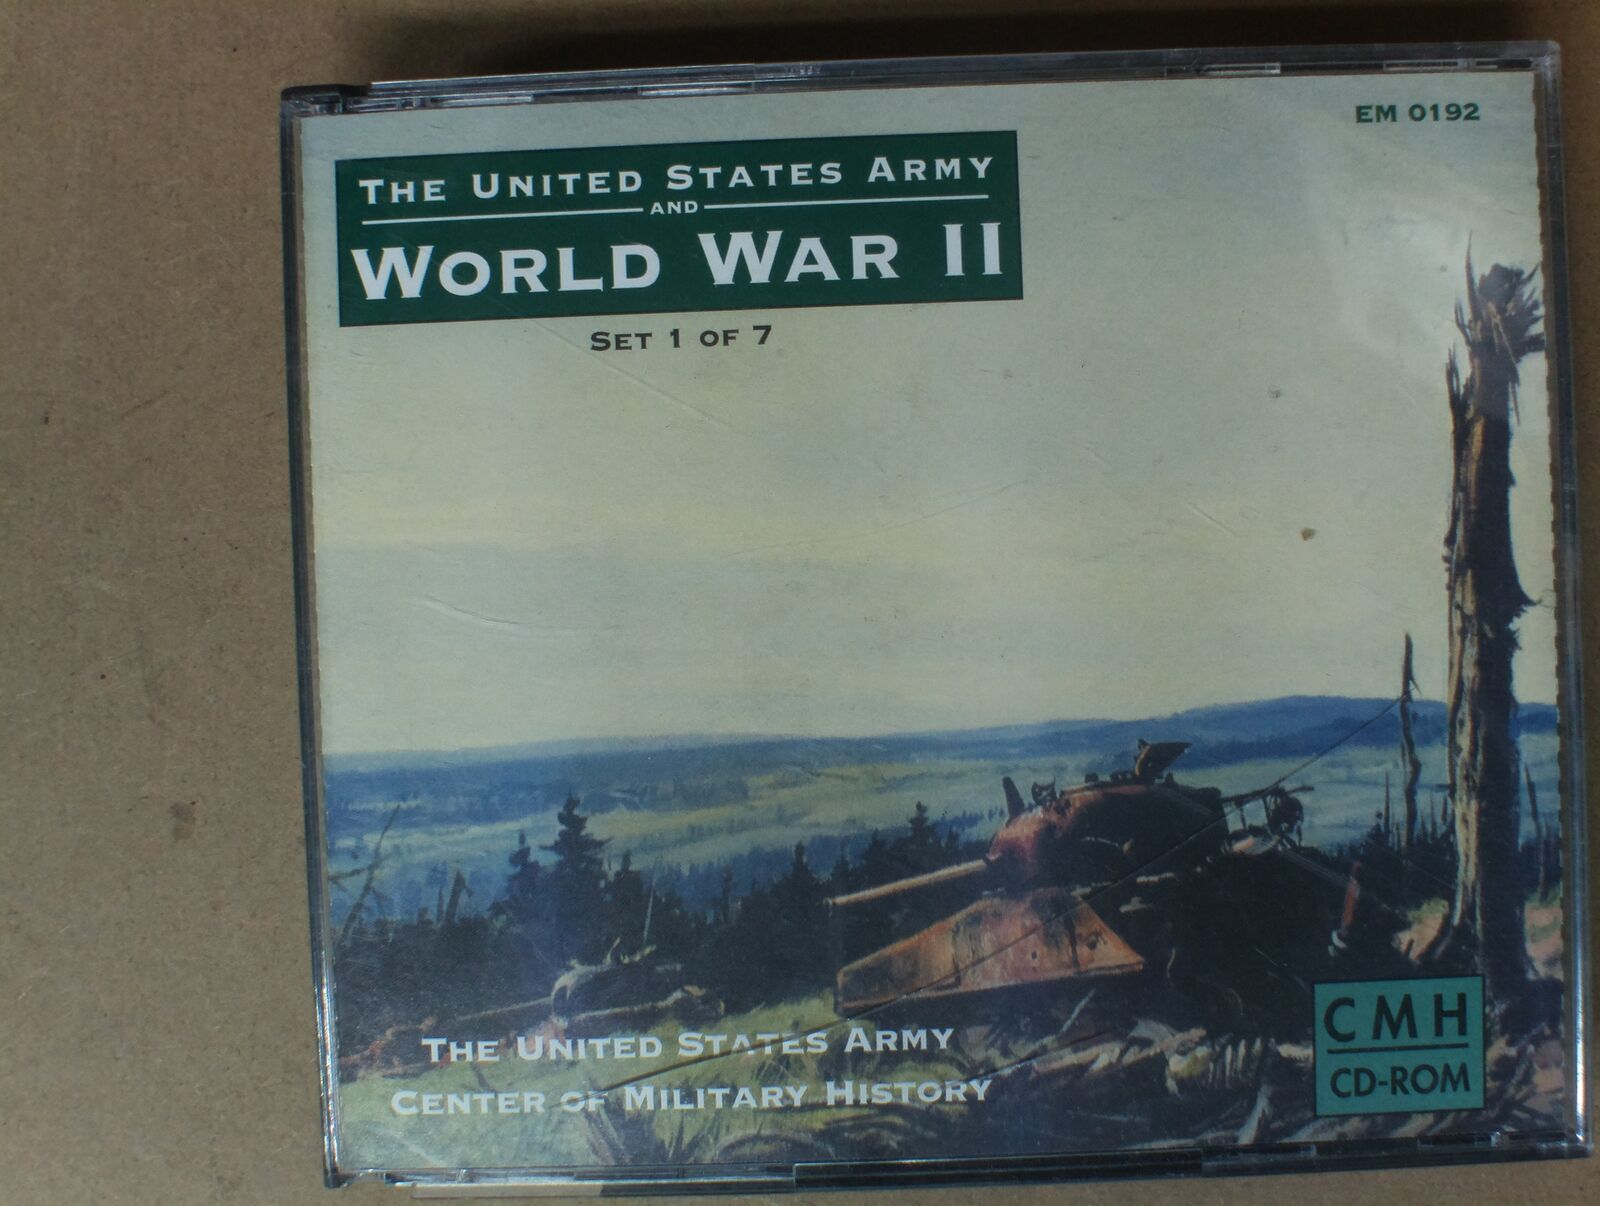 United States Army Center of Military History CD Rom World War II 2, set 1 of 7